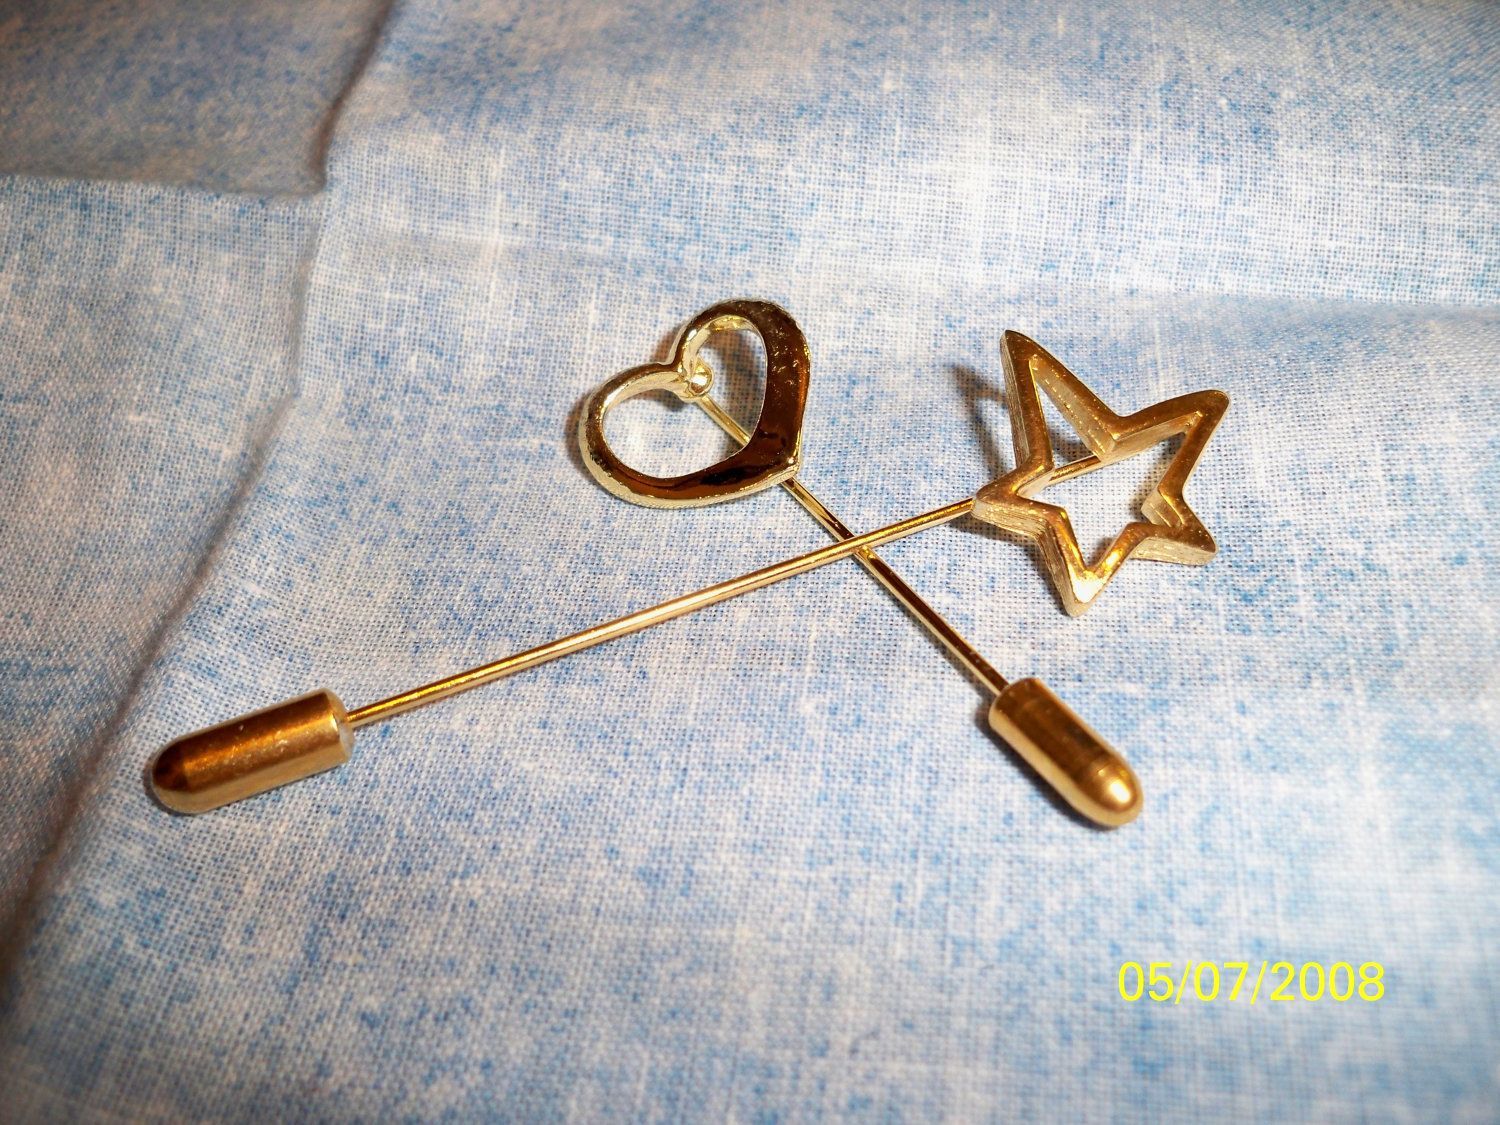 Vintage 70’s stick pins. We all had them for our three piece suits or our cowl neck sweaters.